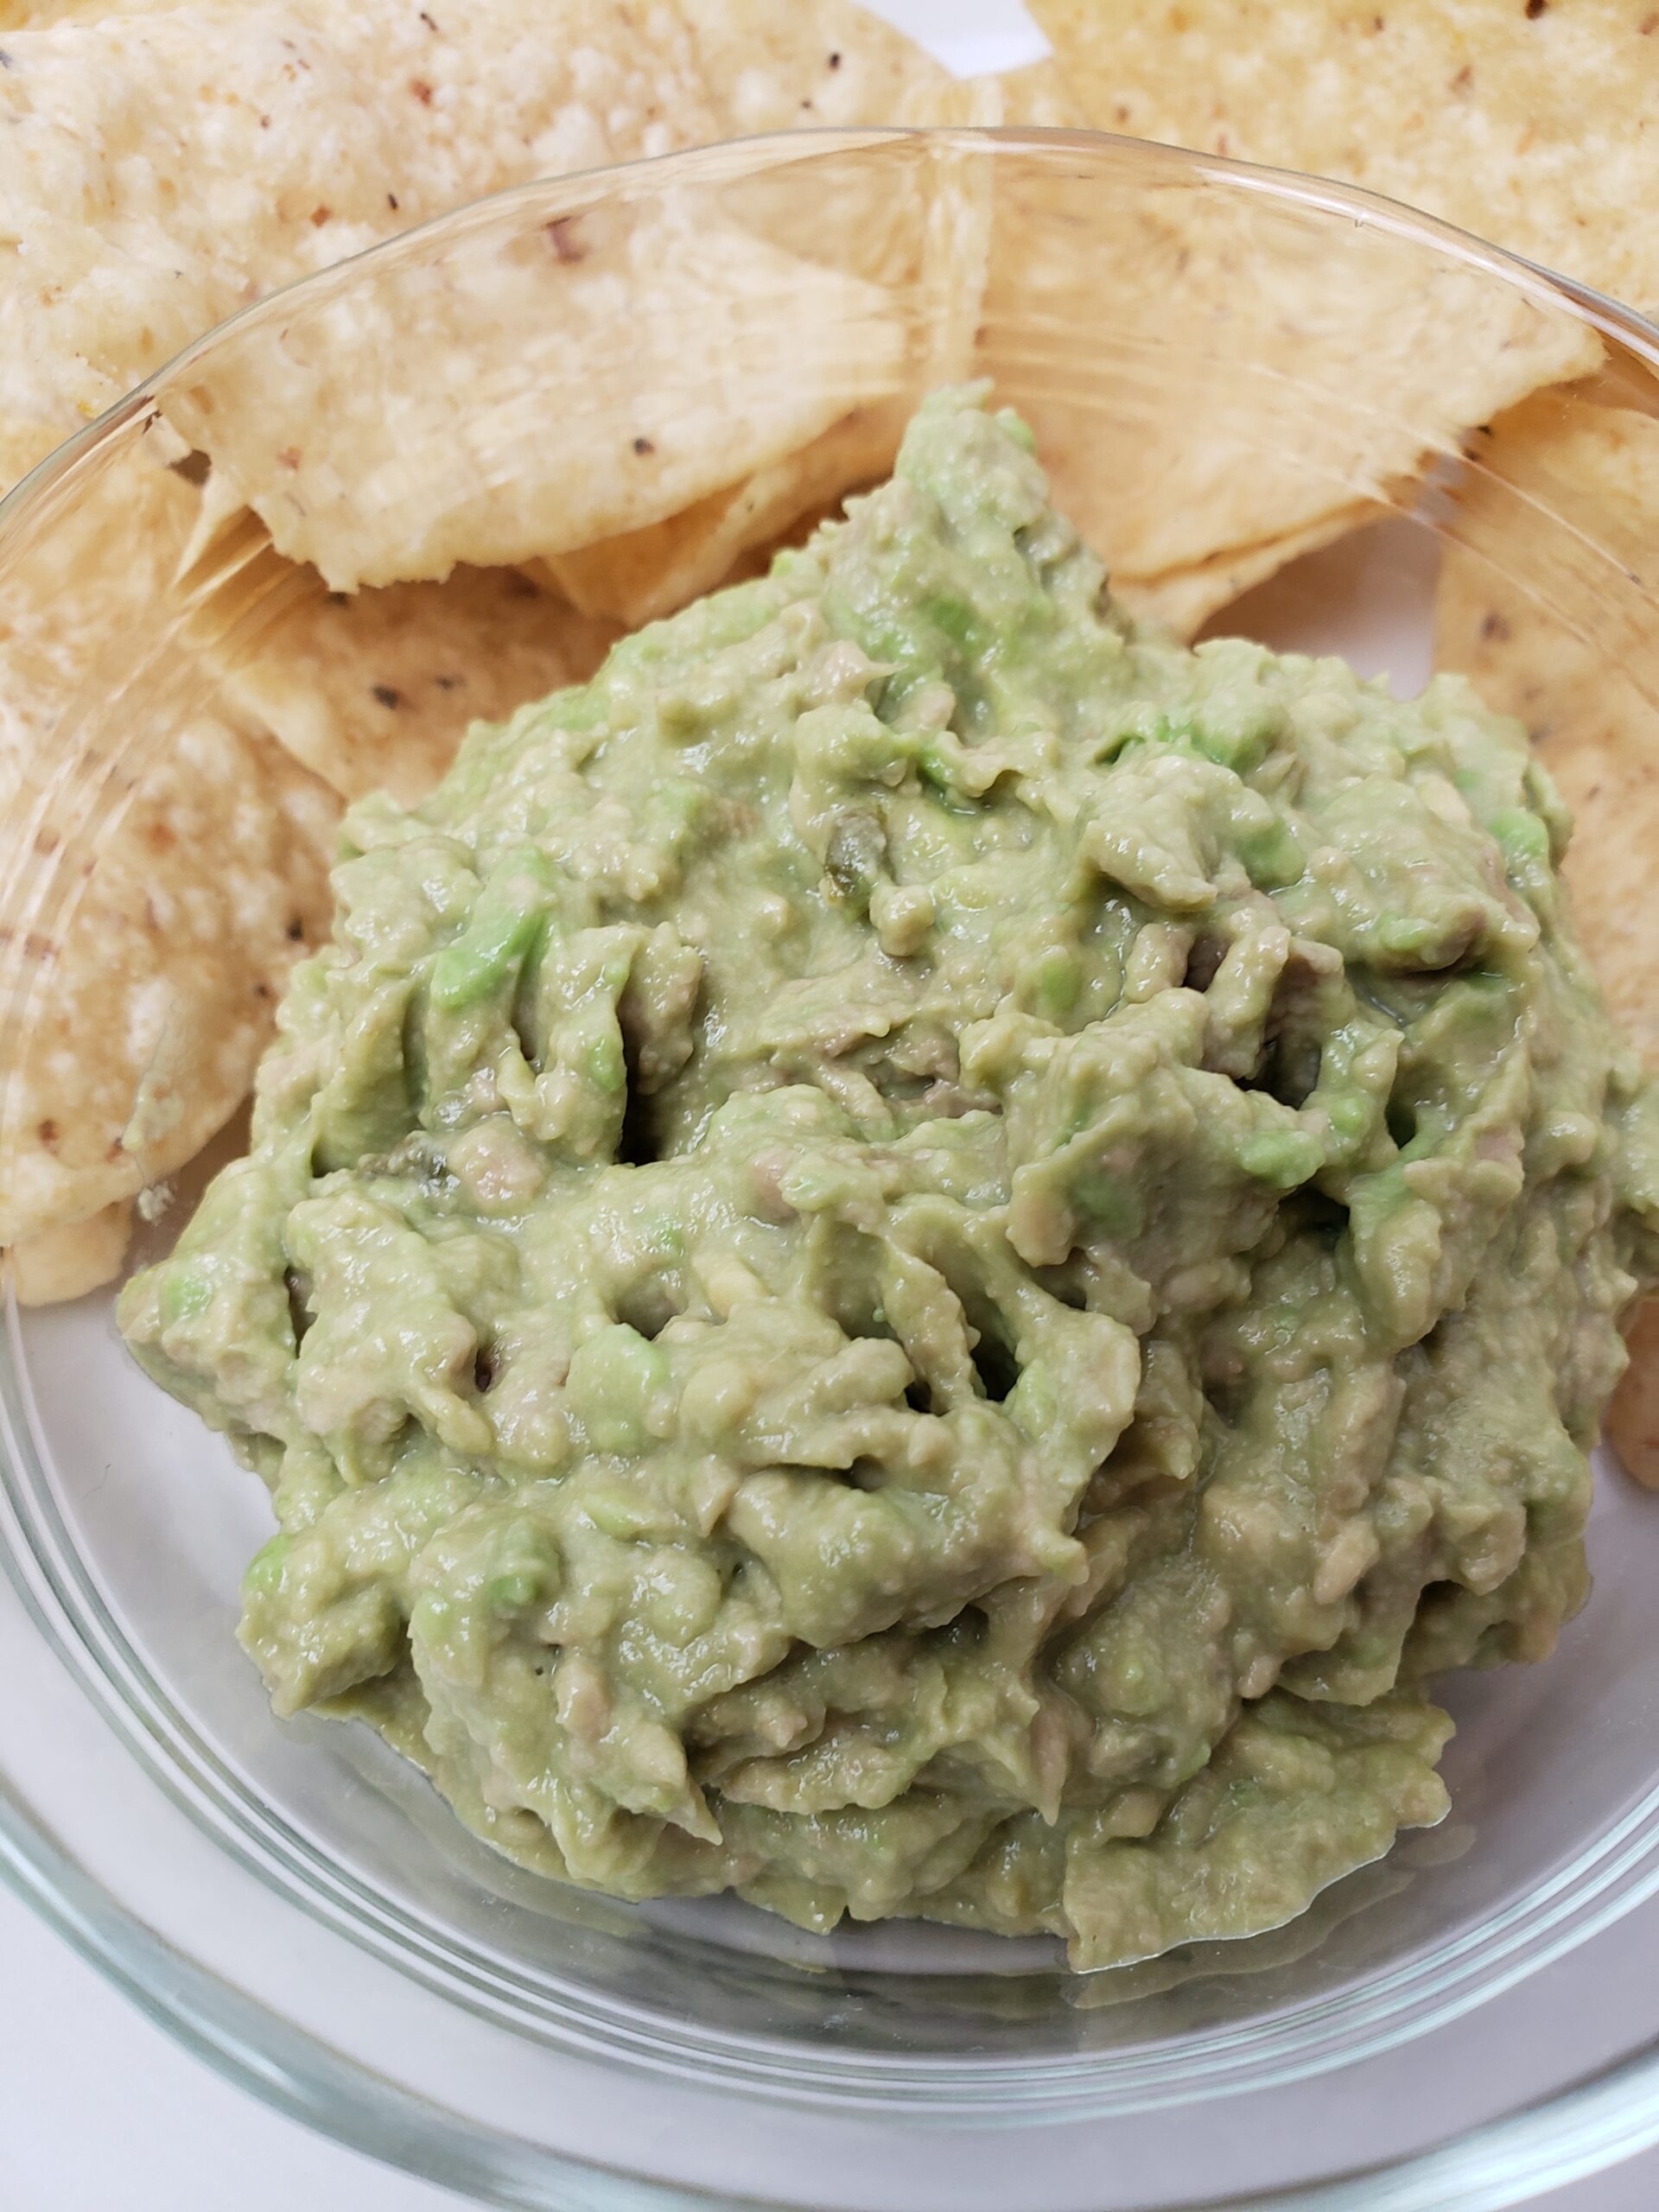 Simple Creamy Guacamole in glass dish surrounded by tortilla chips.